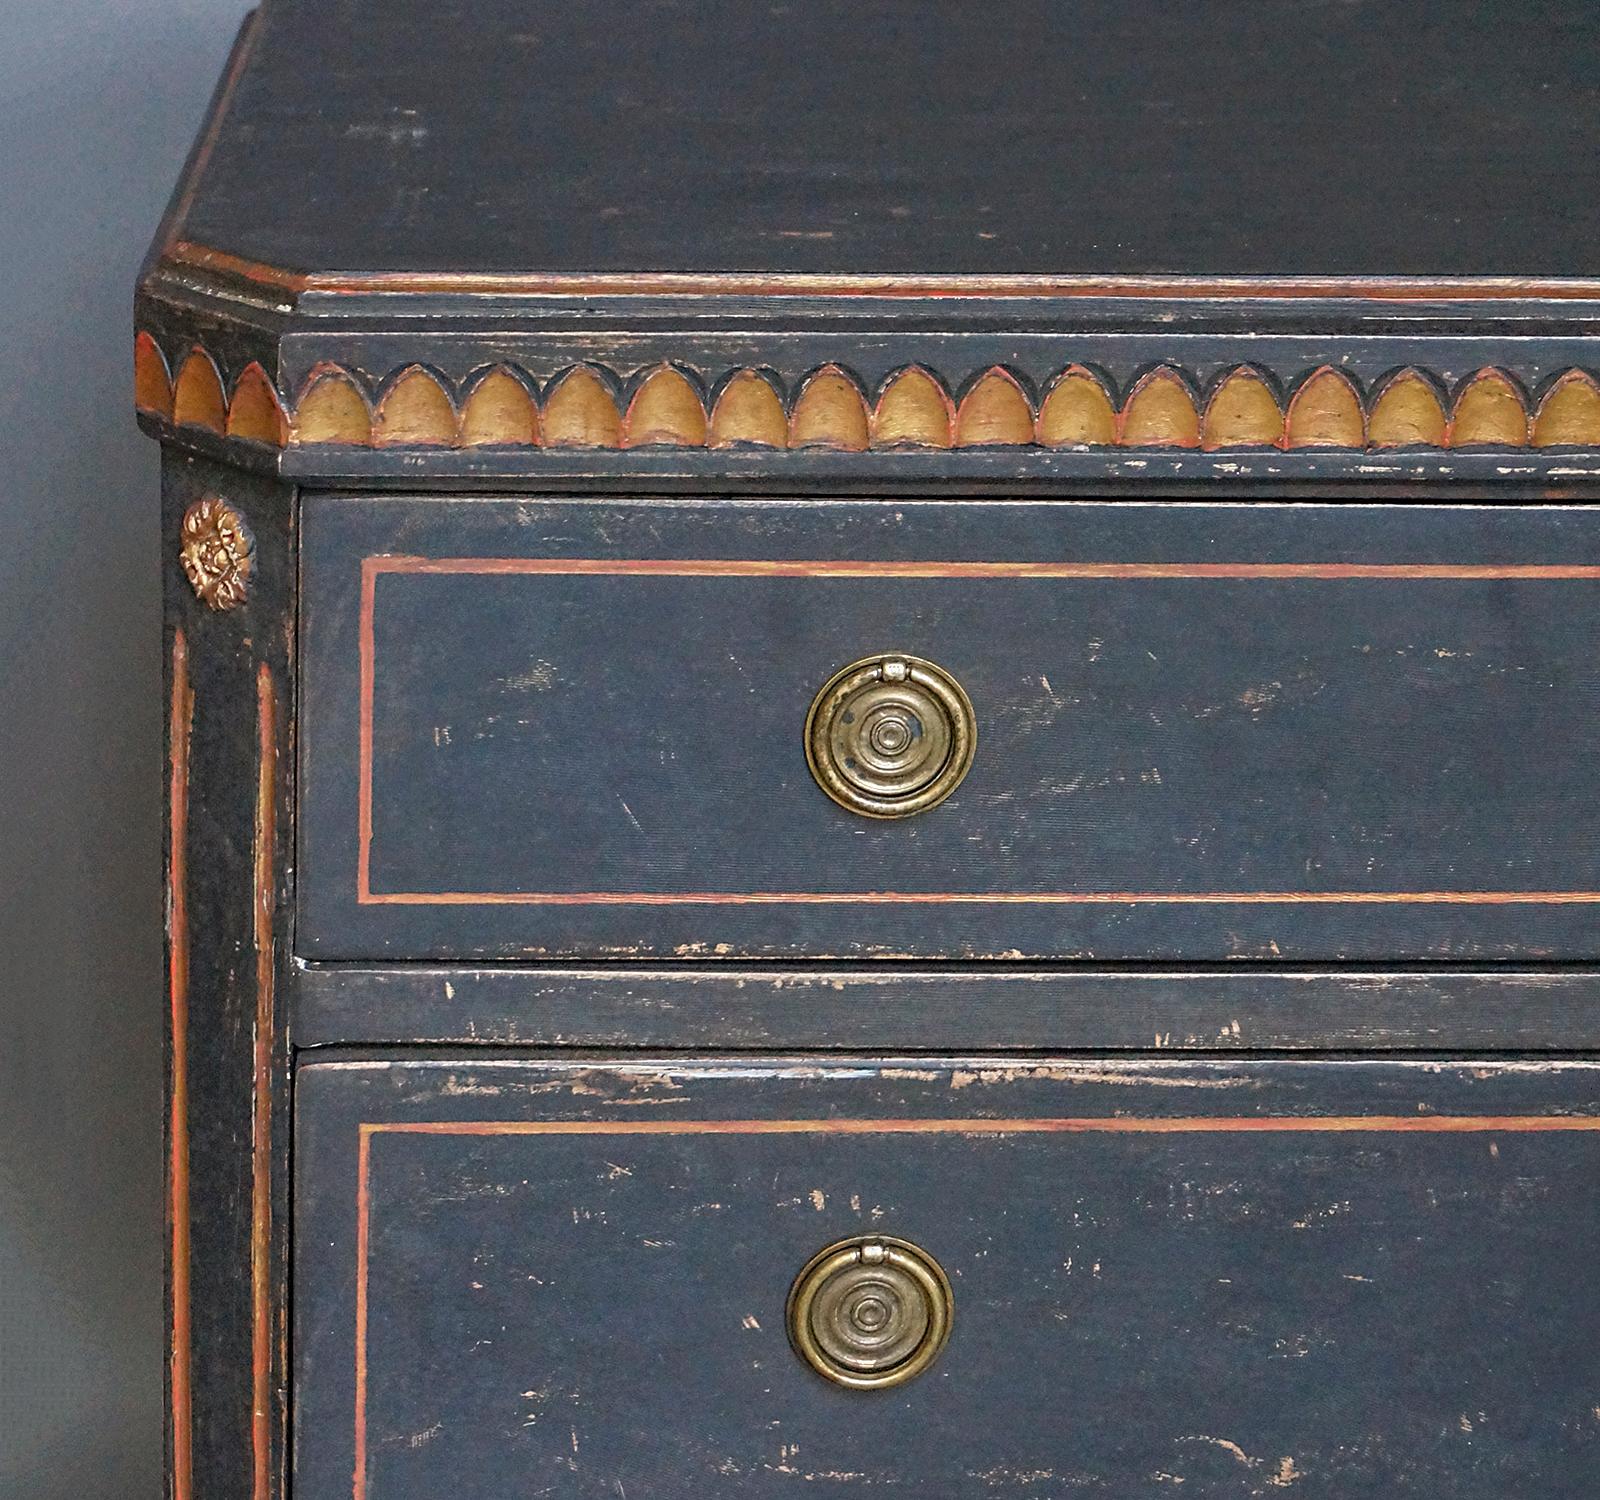 19th Century Pair of Gustavian Style Chests of Drawers